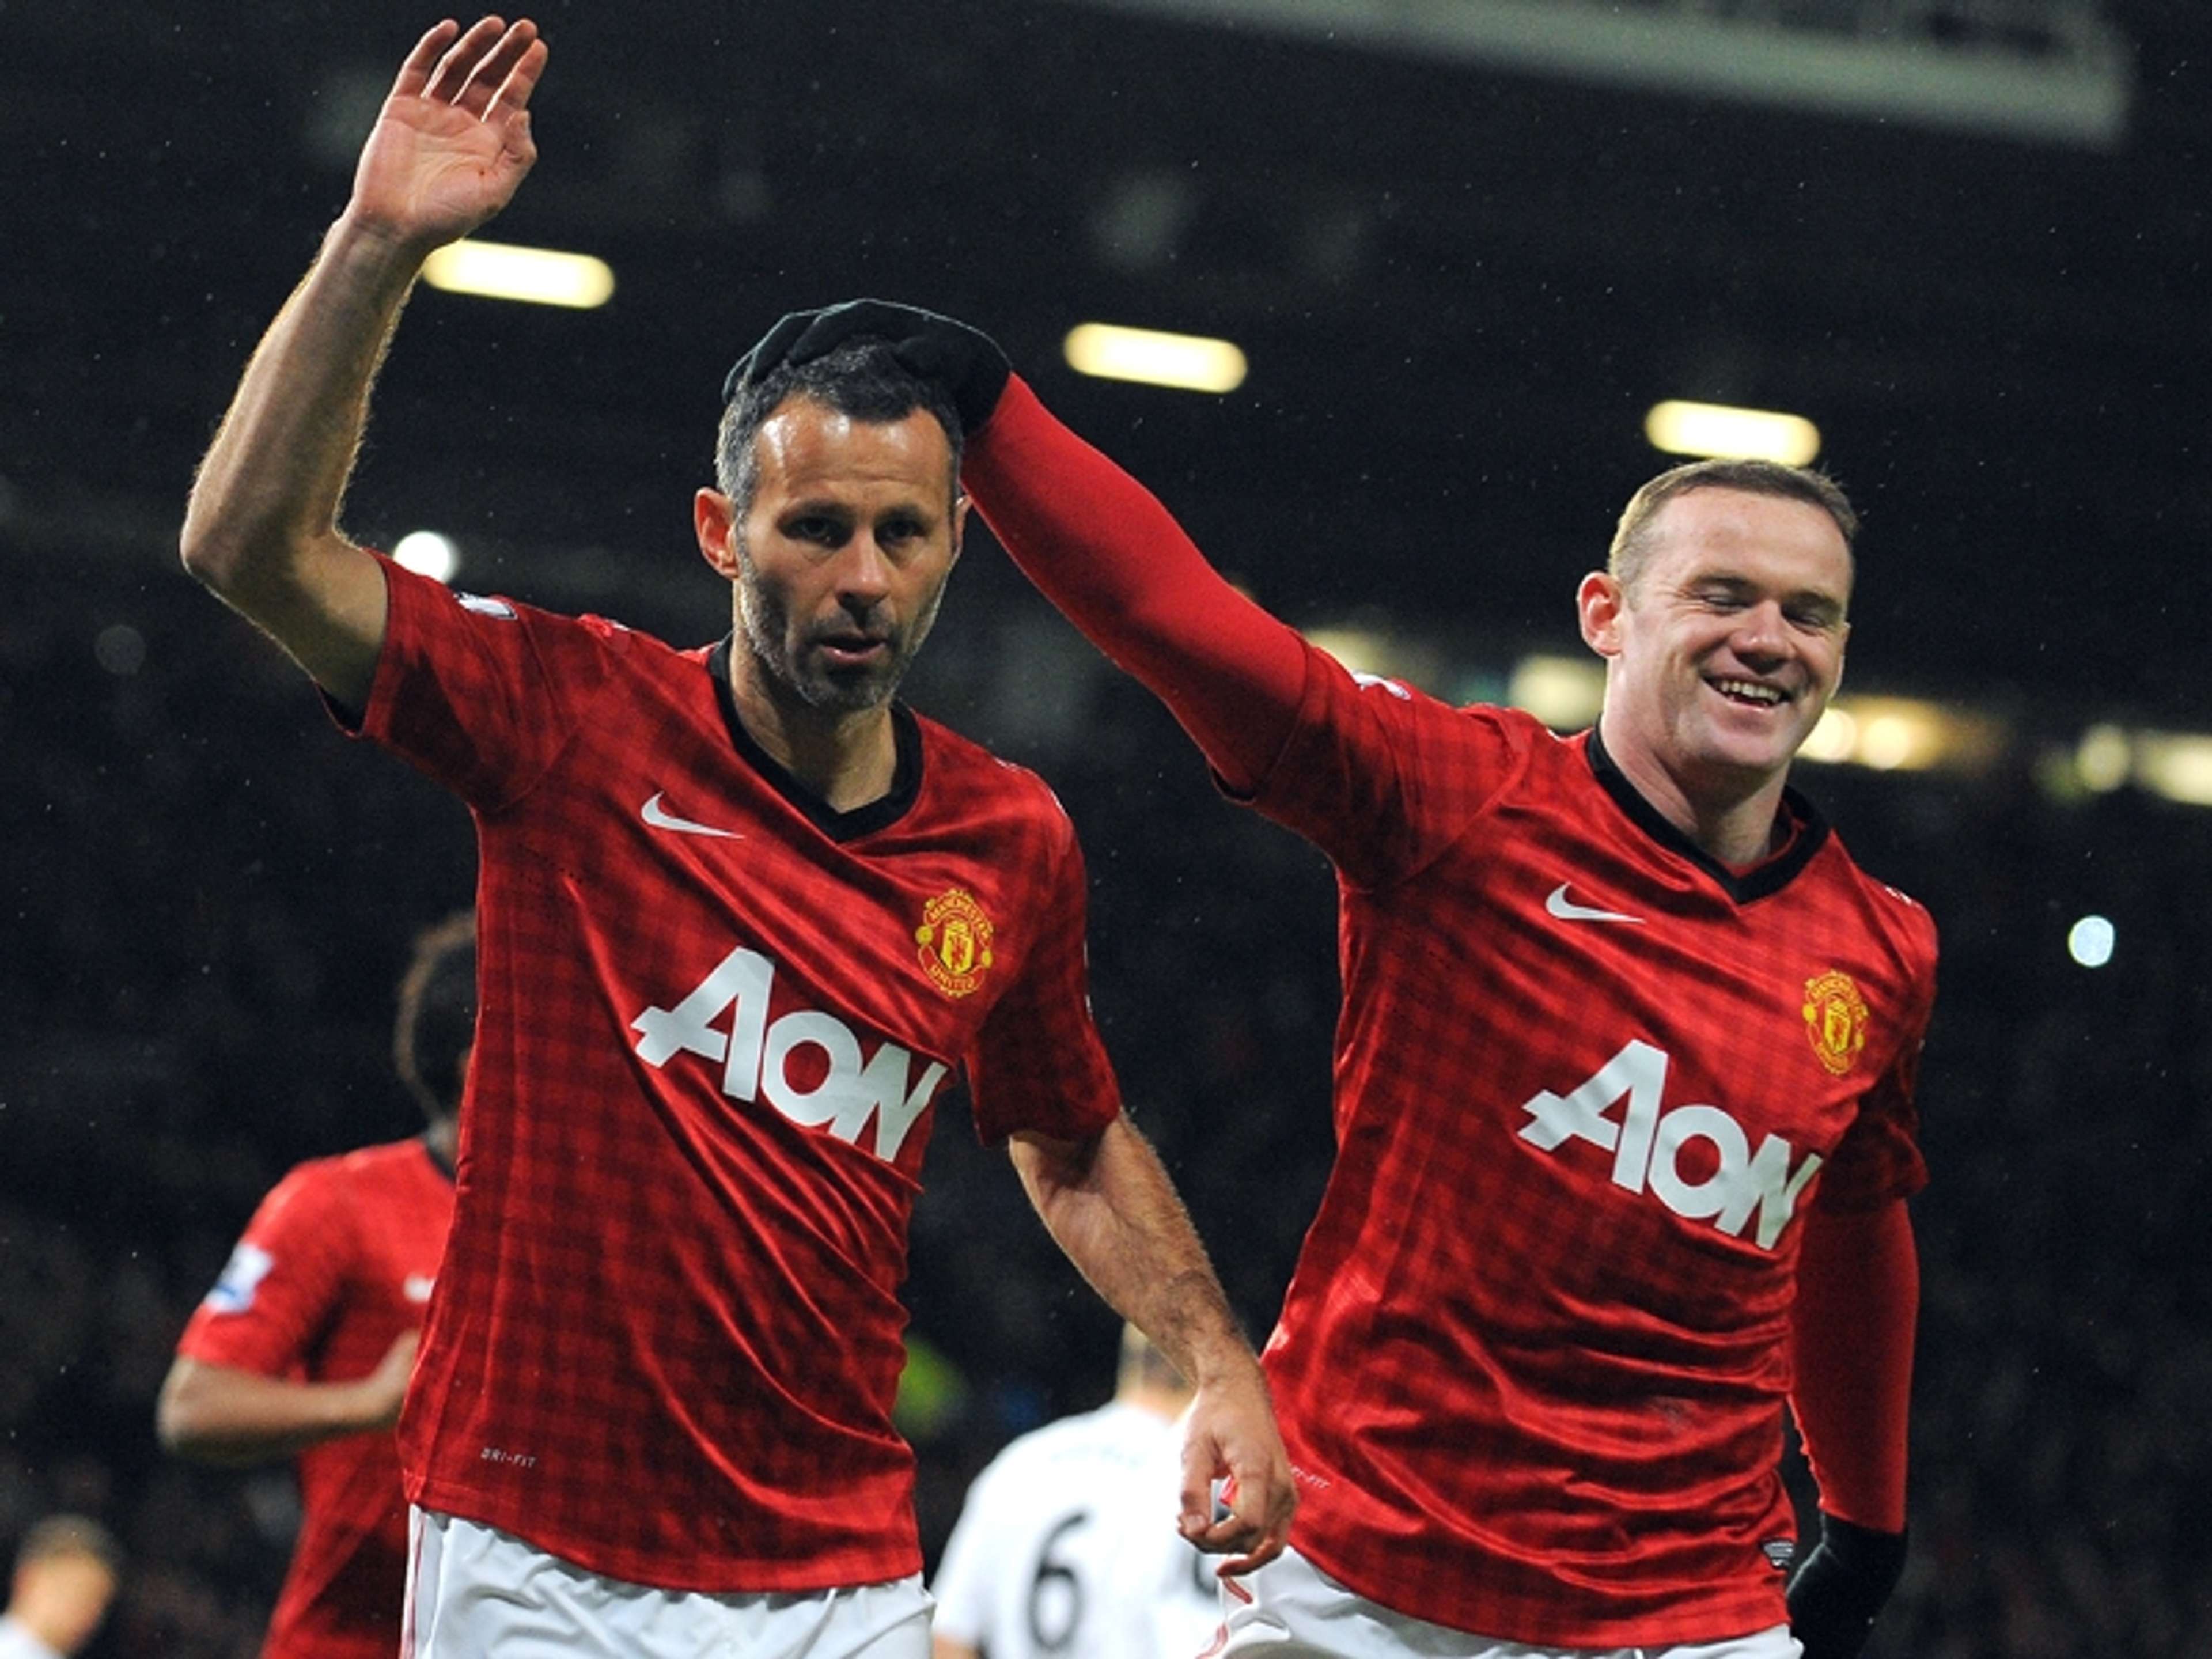 FA Cup - Manchester United v Fulham, Ryan Giggs and Wayne Rooney